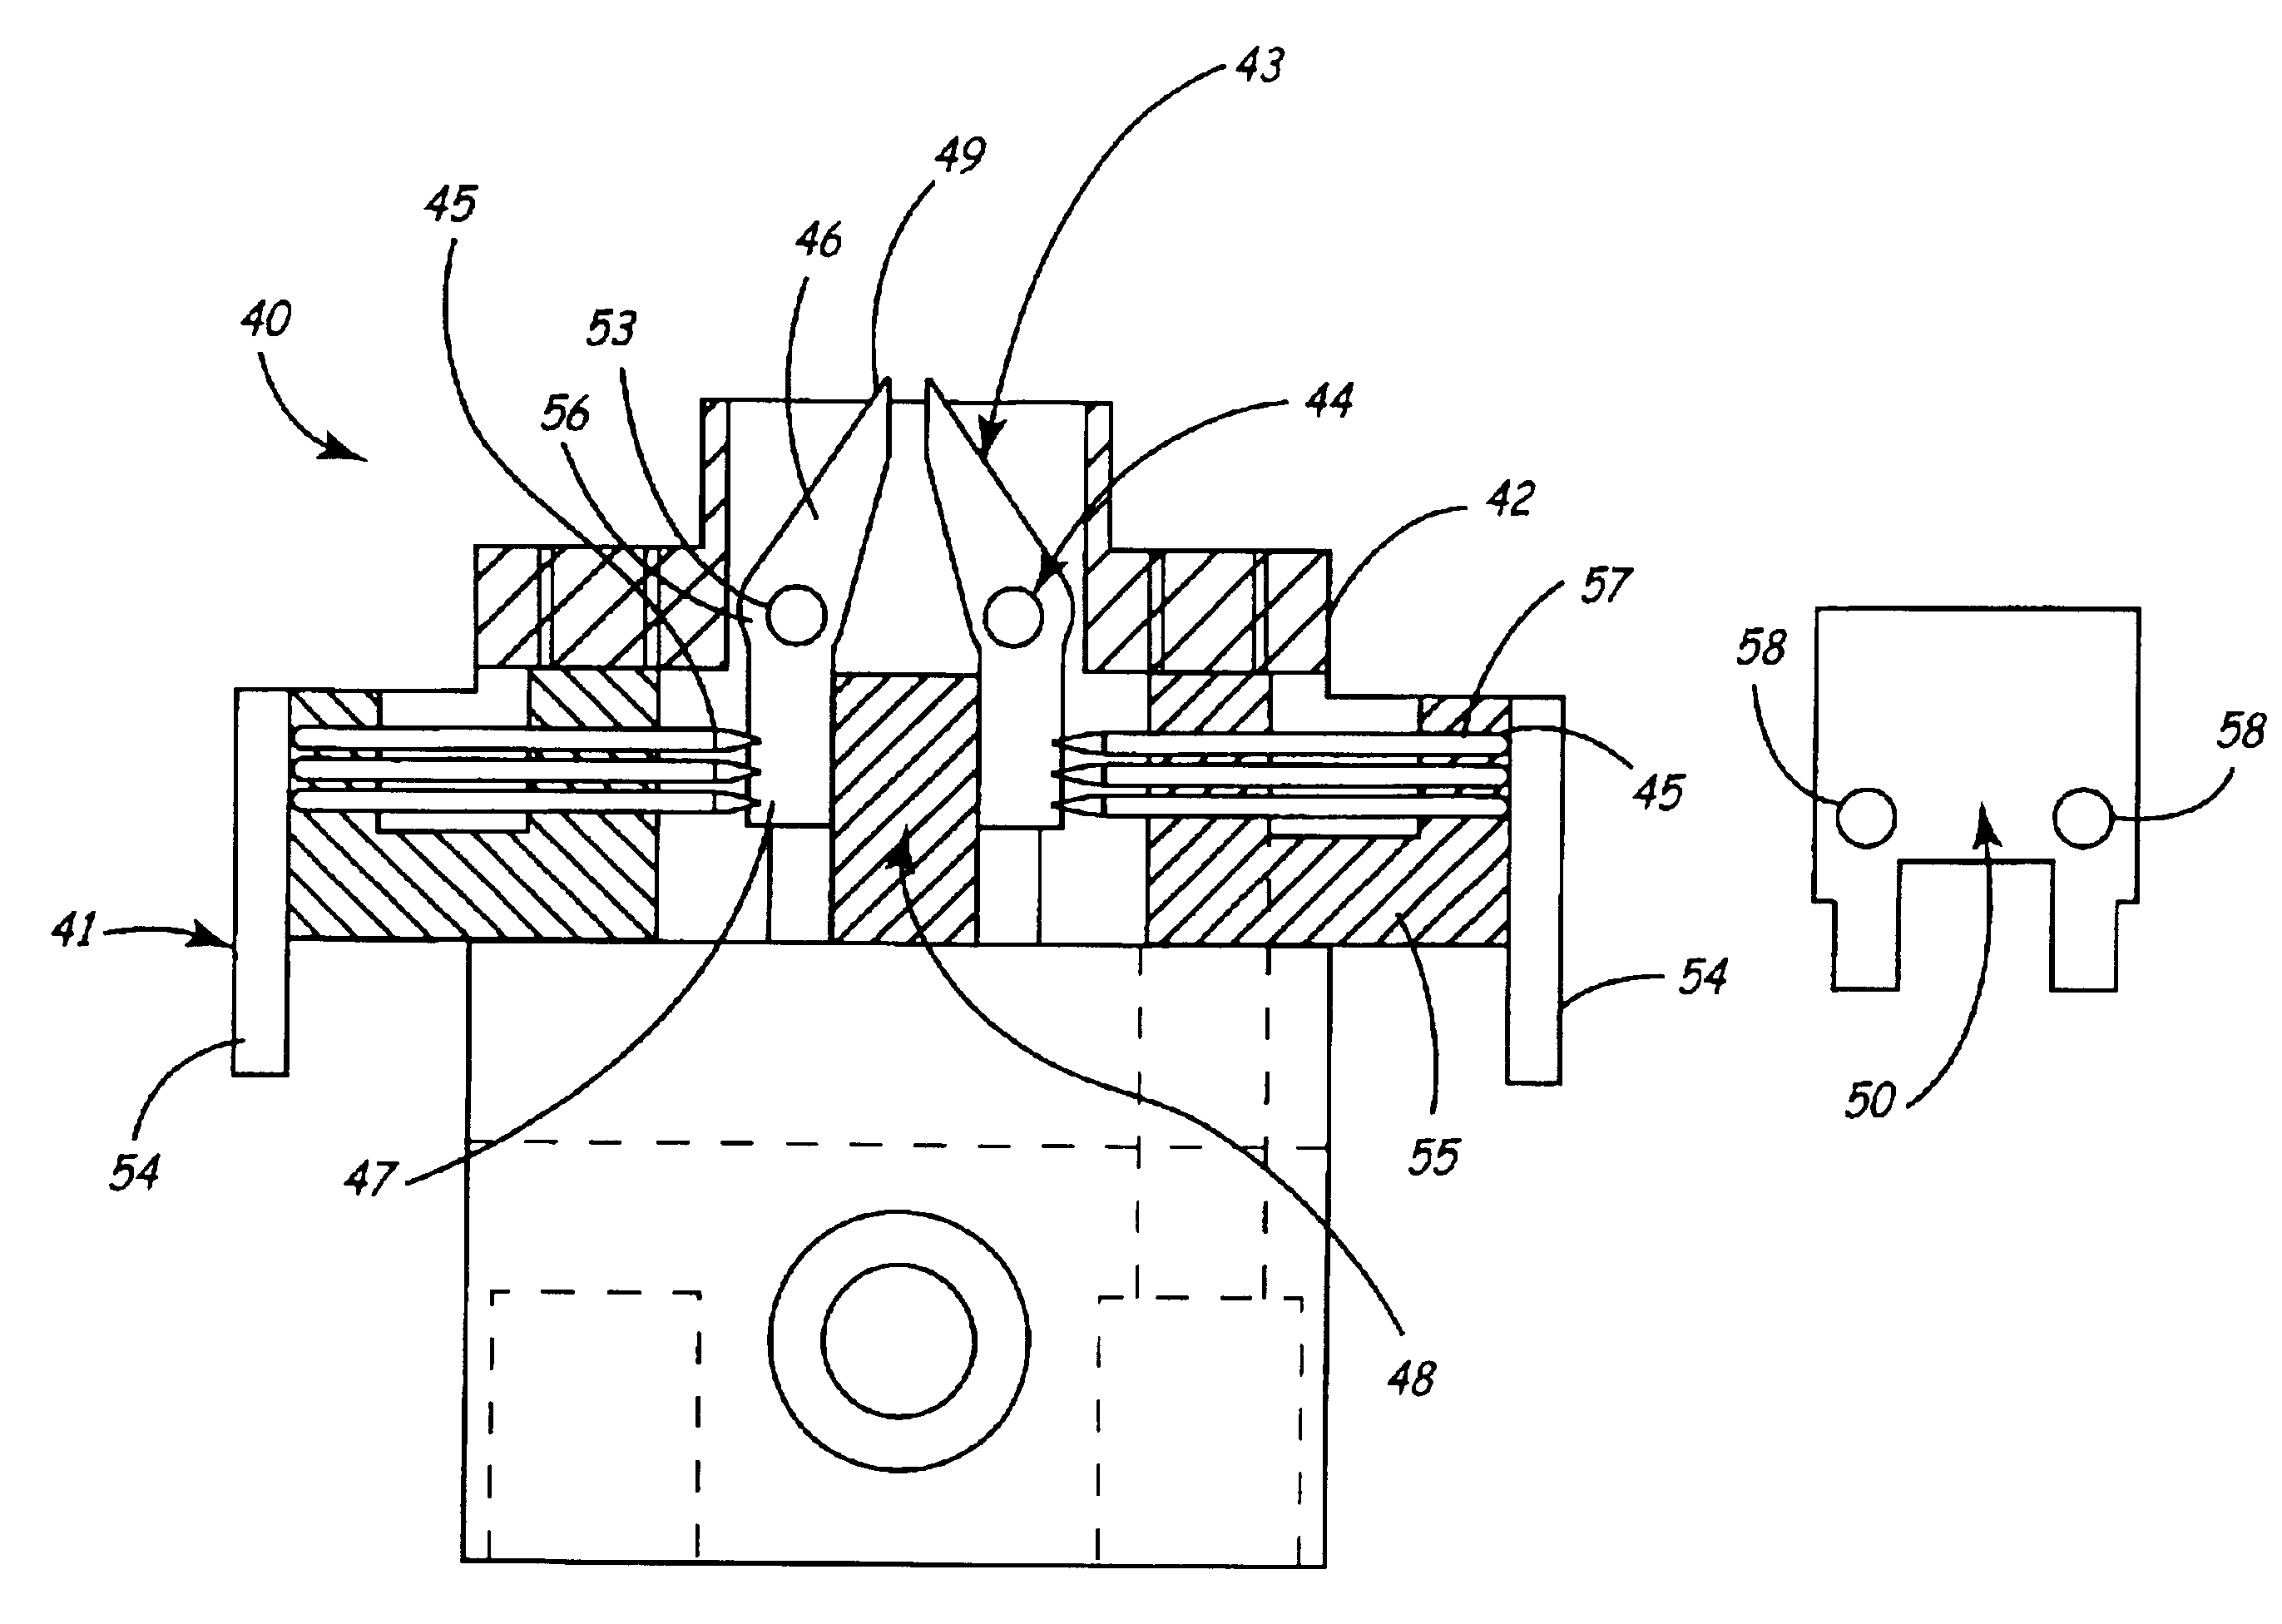 Micro connector to facilitate testing of micro electronic component and subassemblies